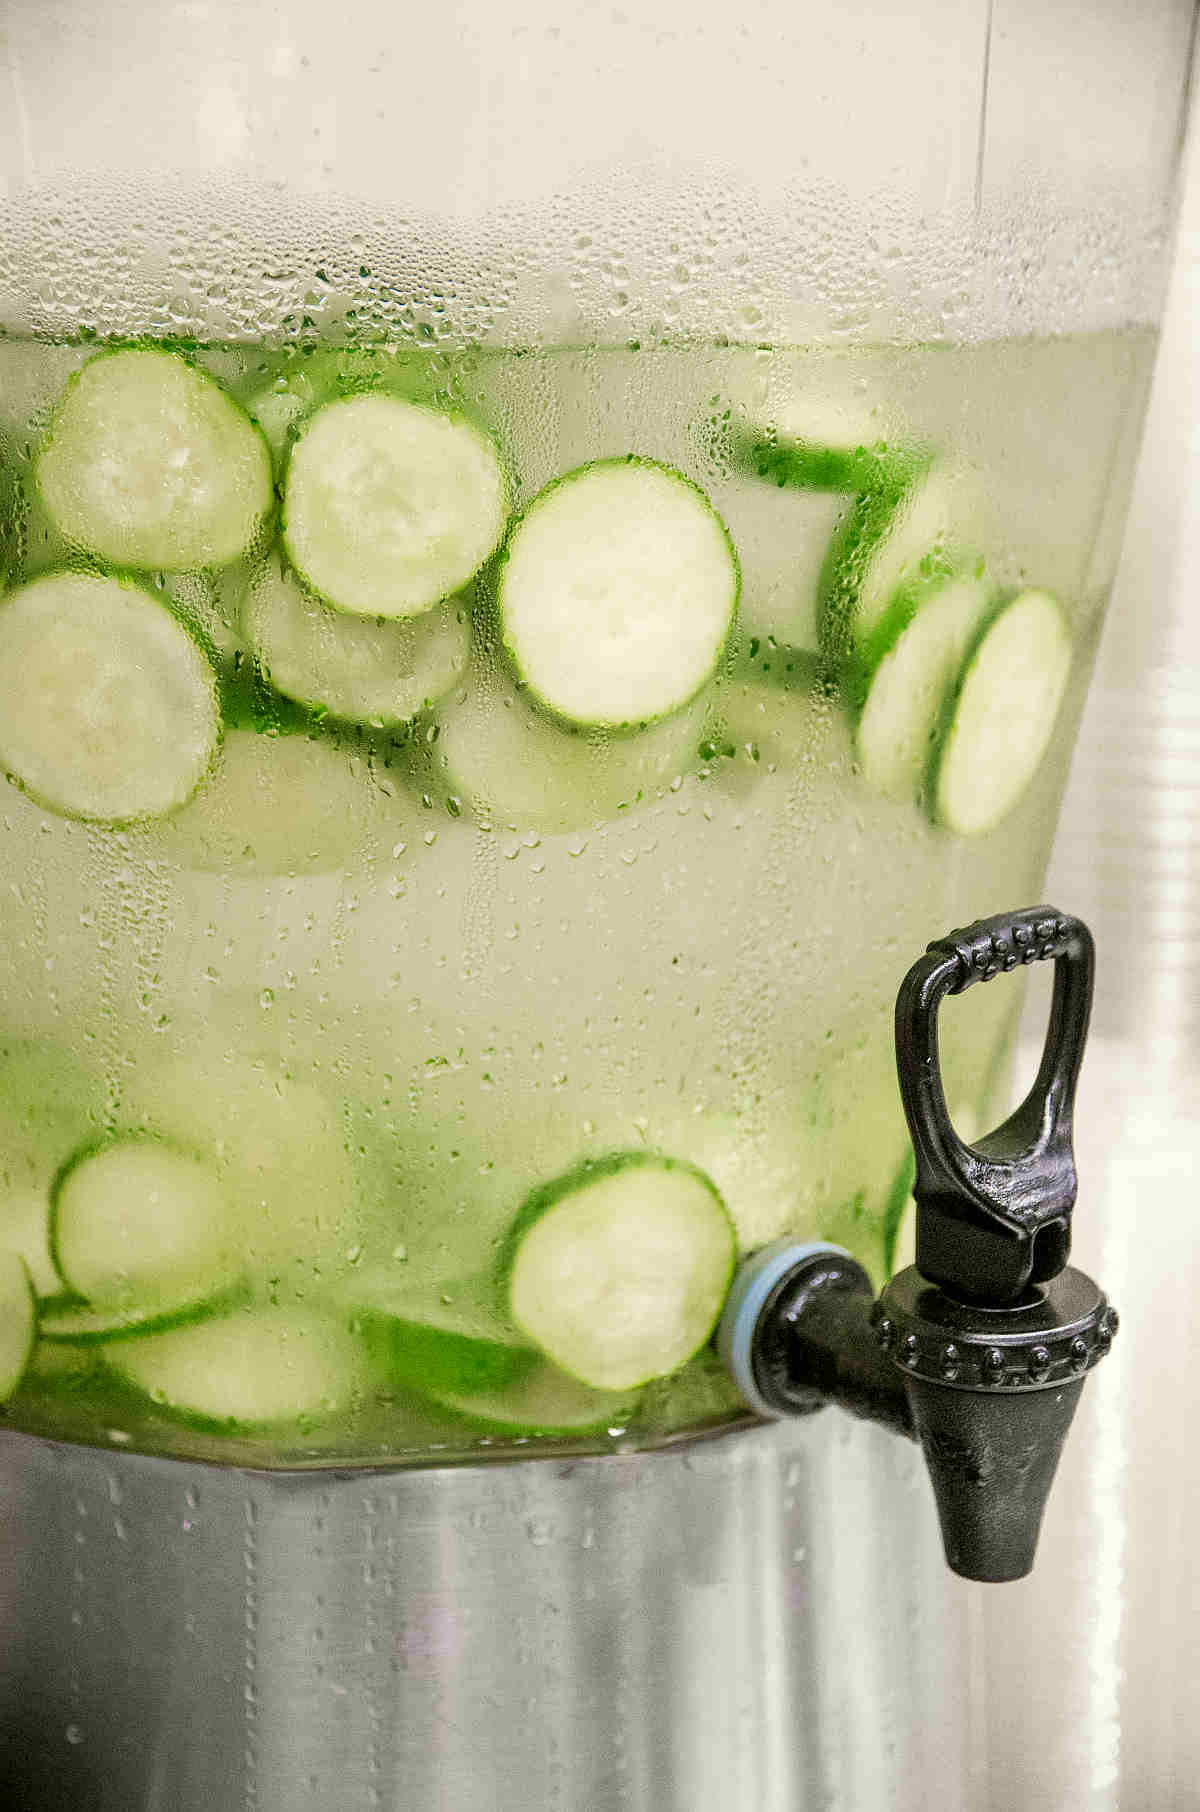 Water cucumber green healthy drink | Fruits and Veggies That Can Keep You Hydrated